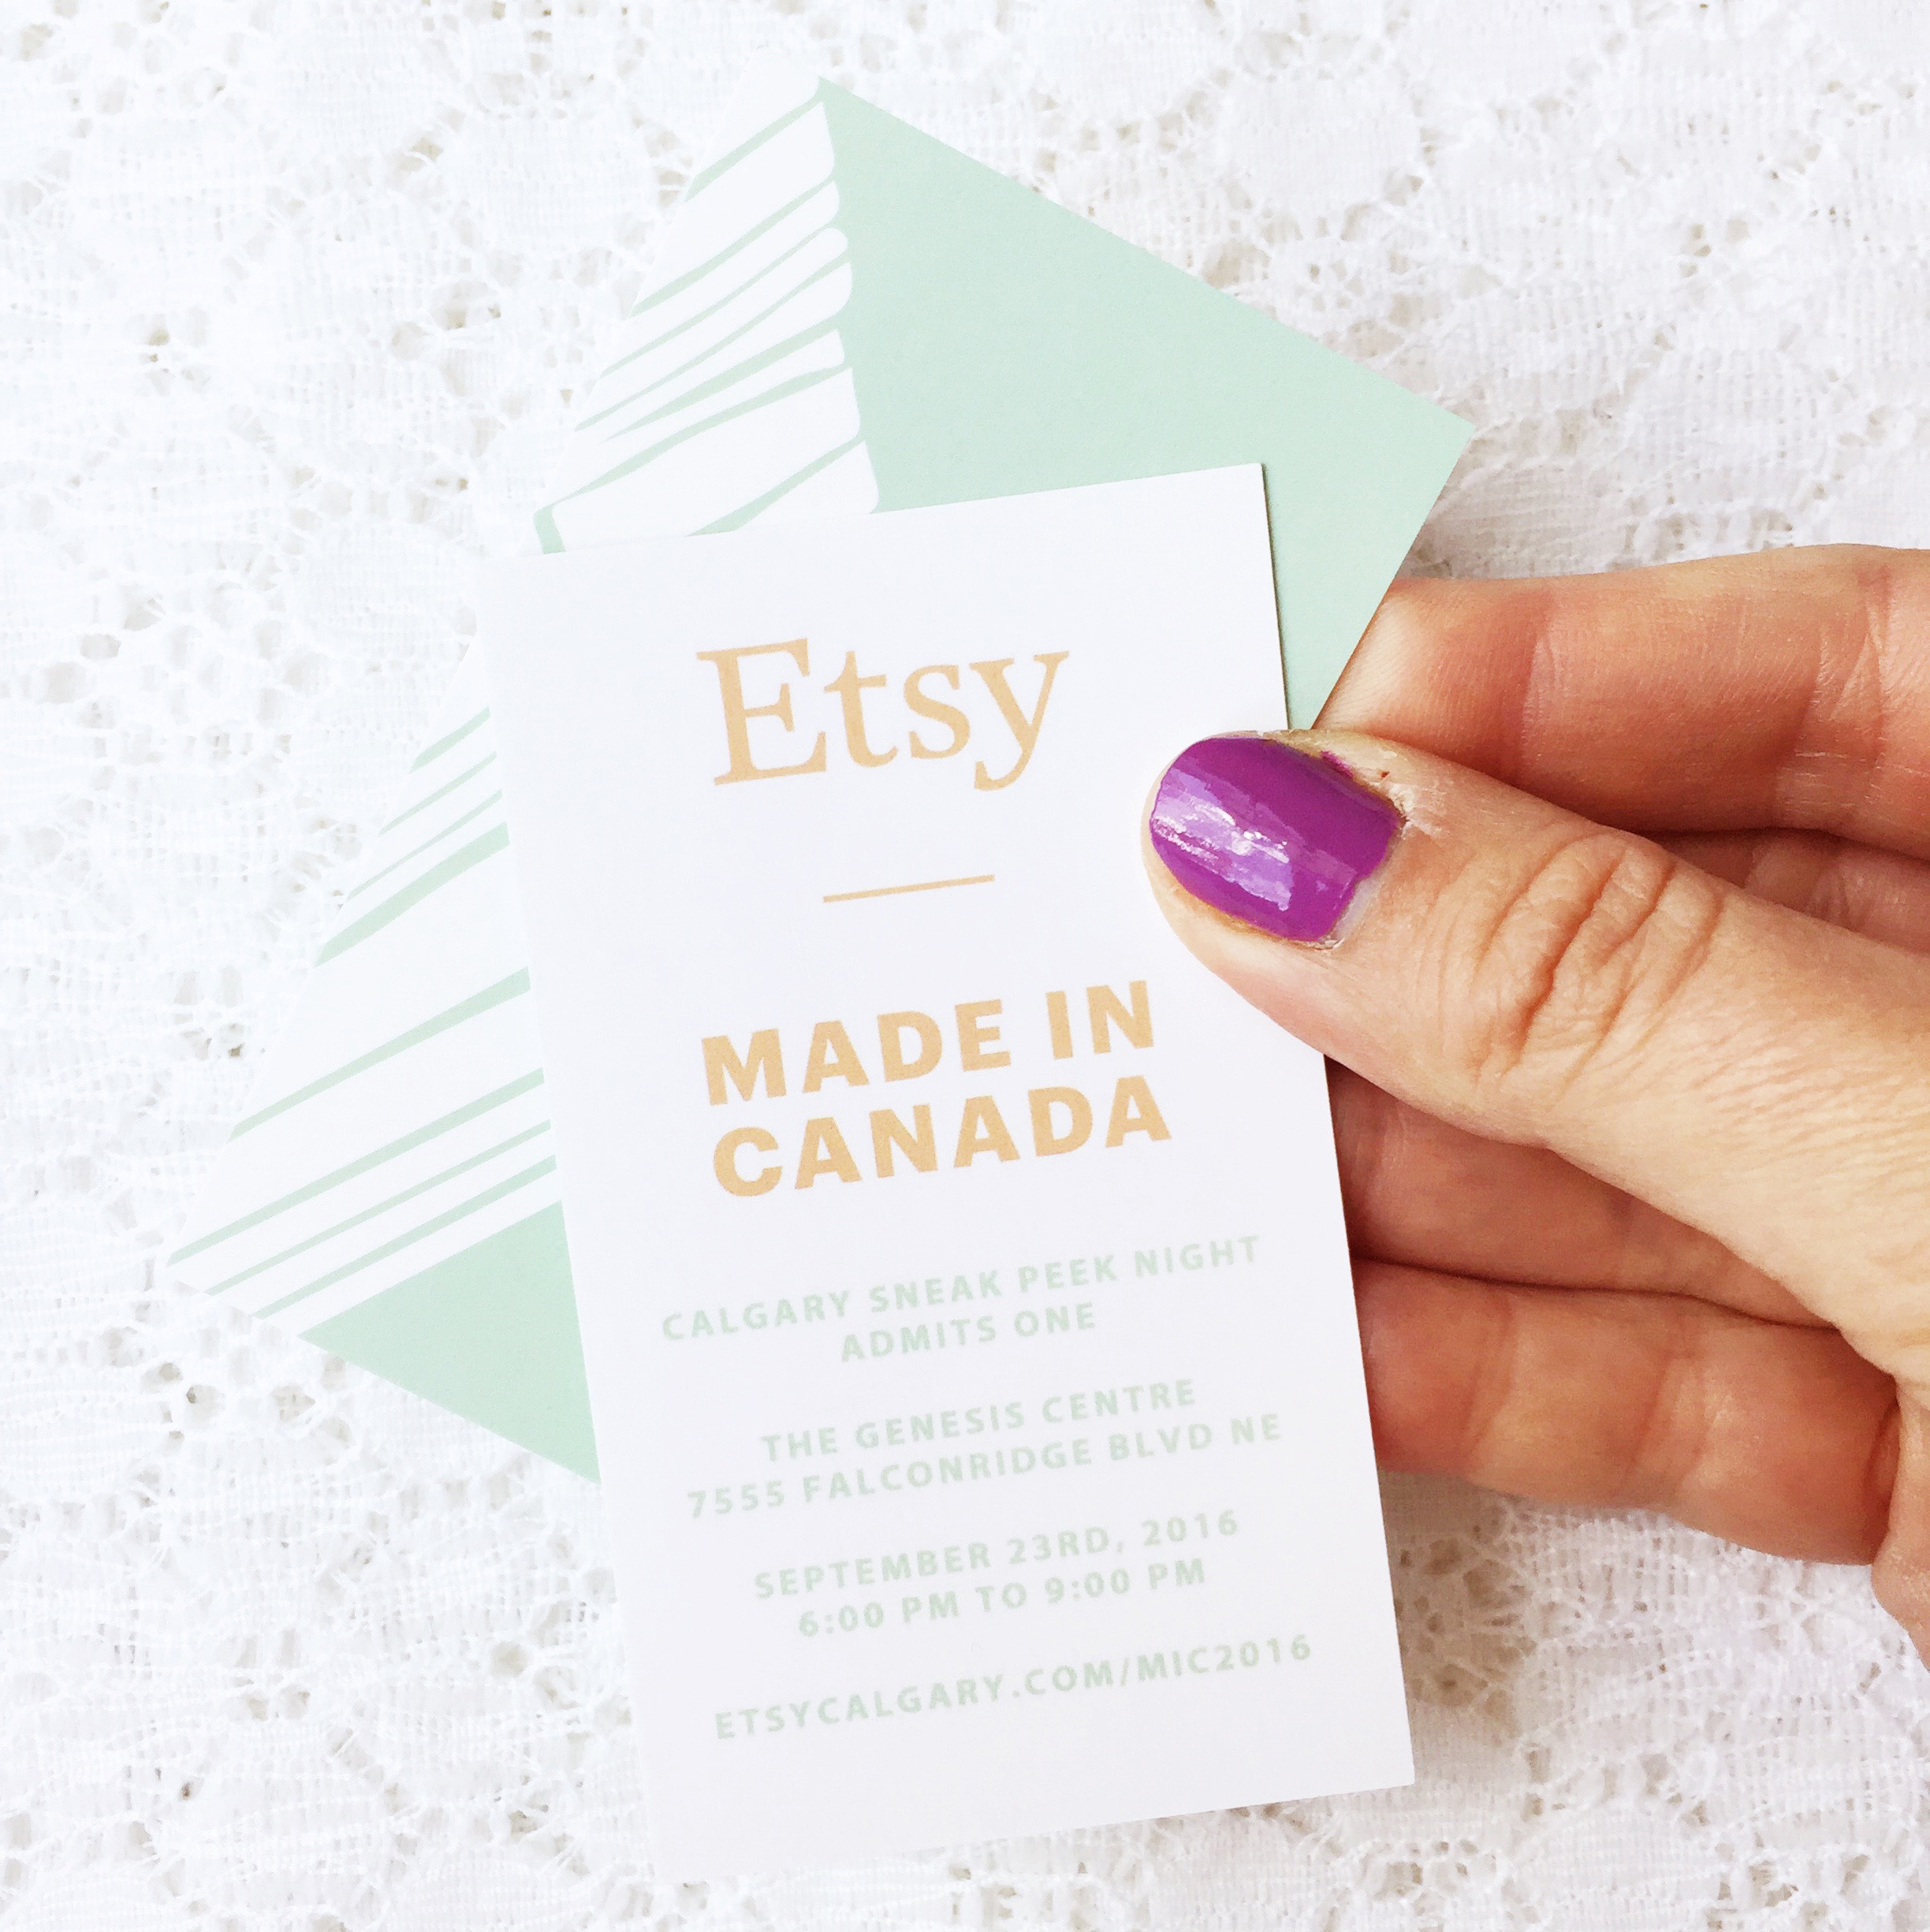 Etsy Calgary: Made In Canada Market, Sept 23-24th ~ Shop Local, Support Handmade